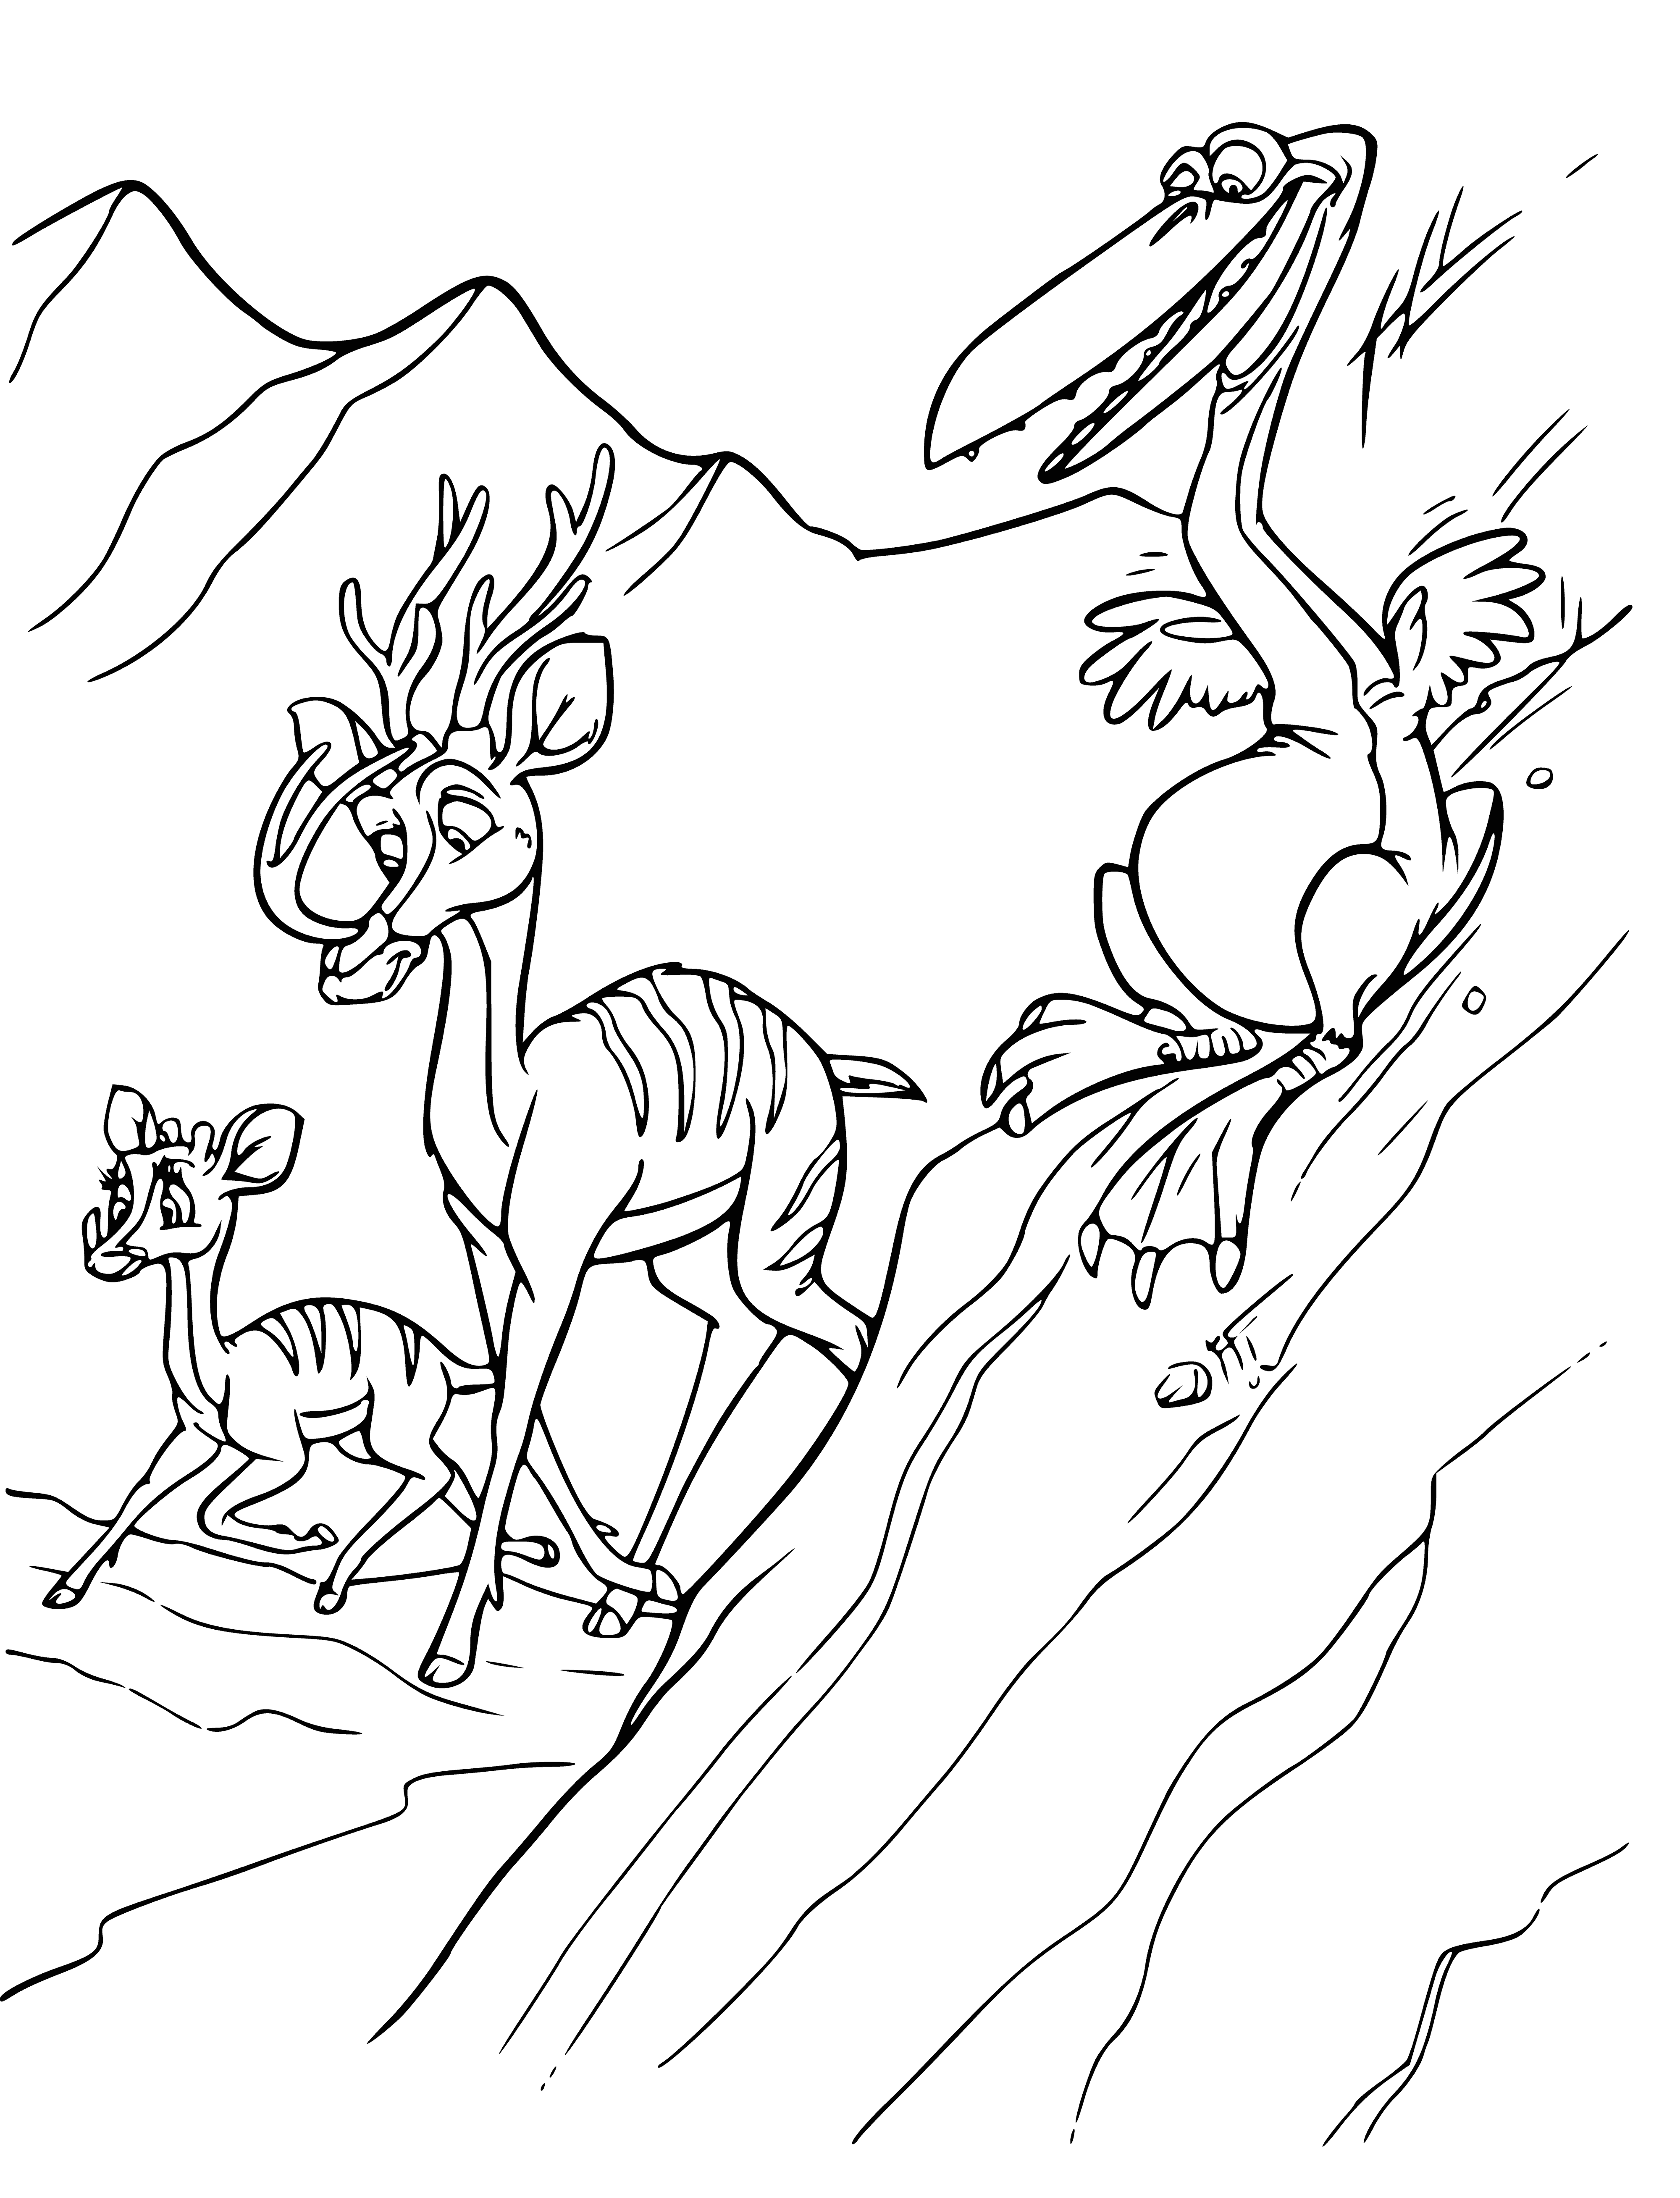 The beasts run to the ship coloring page